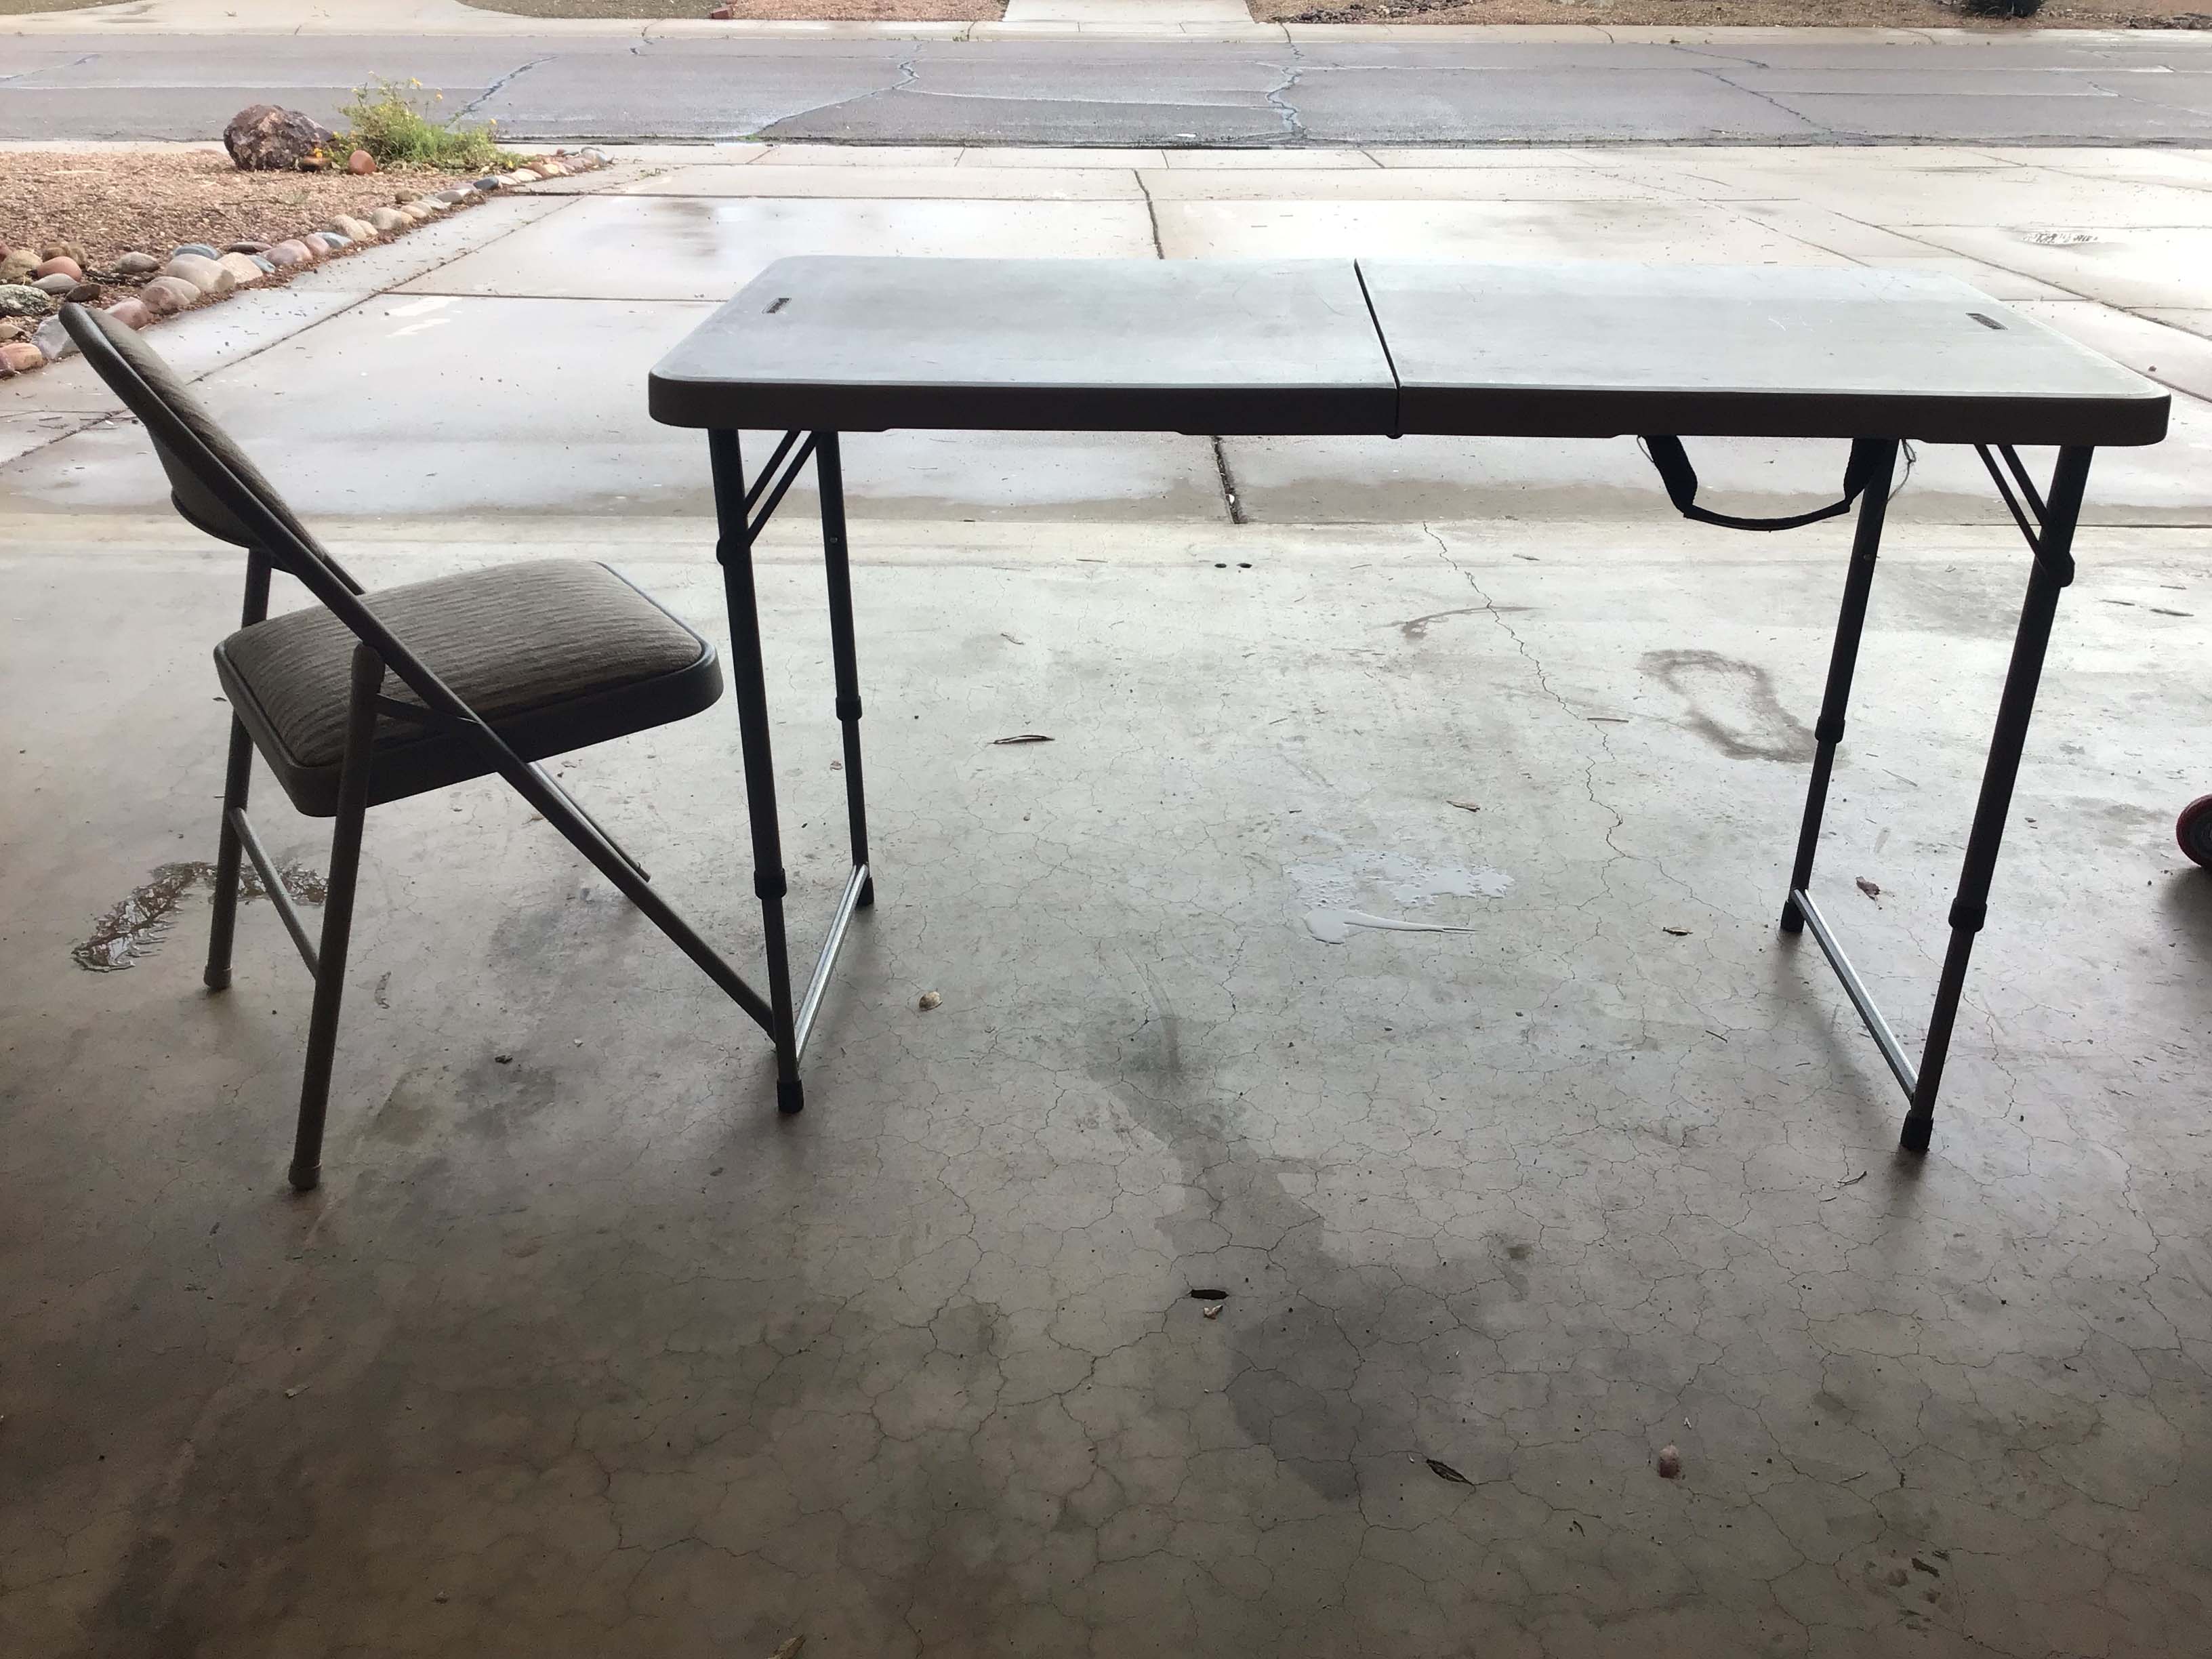 4 foot rectangle tables (adjustable height; gray)